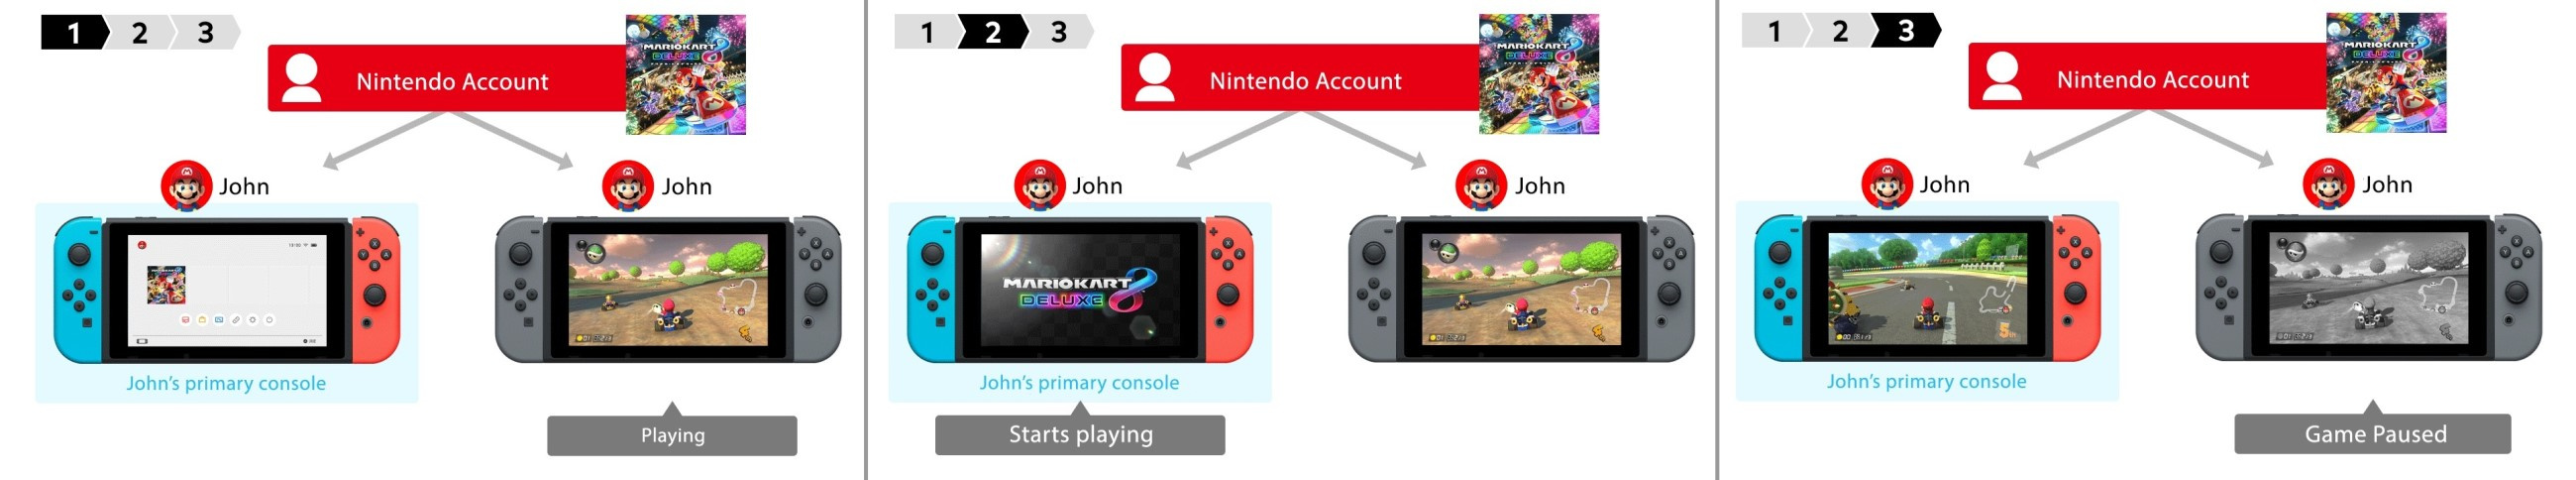 do switch and switch lite use the same games